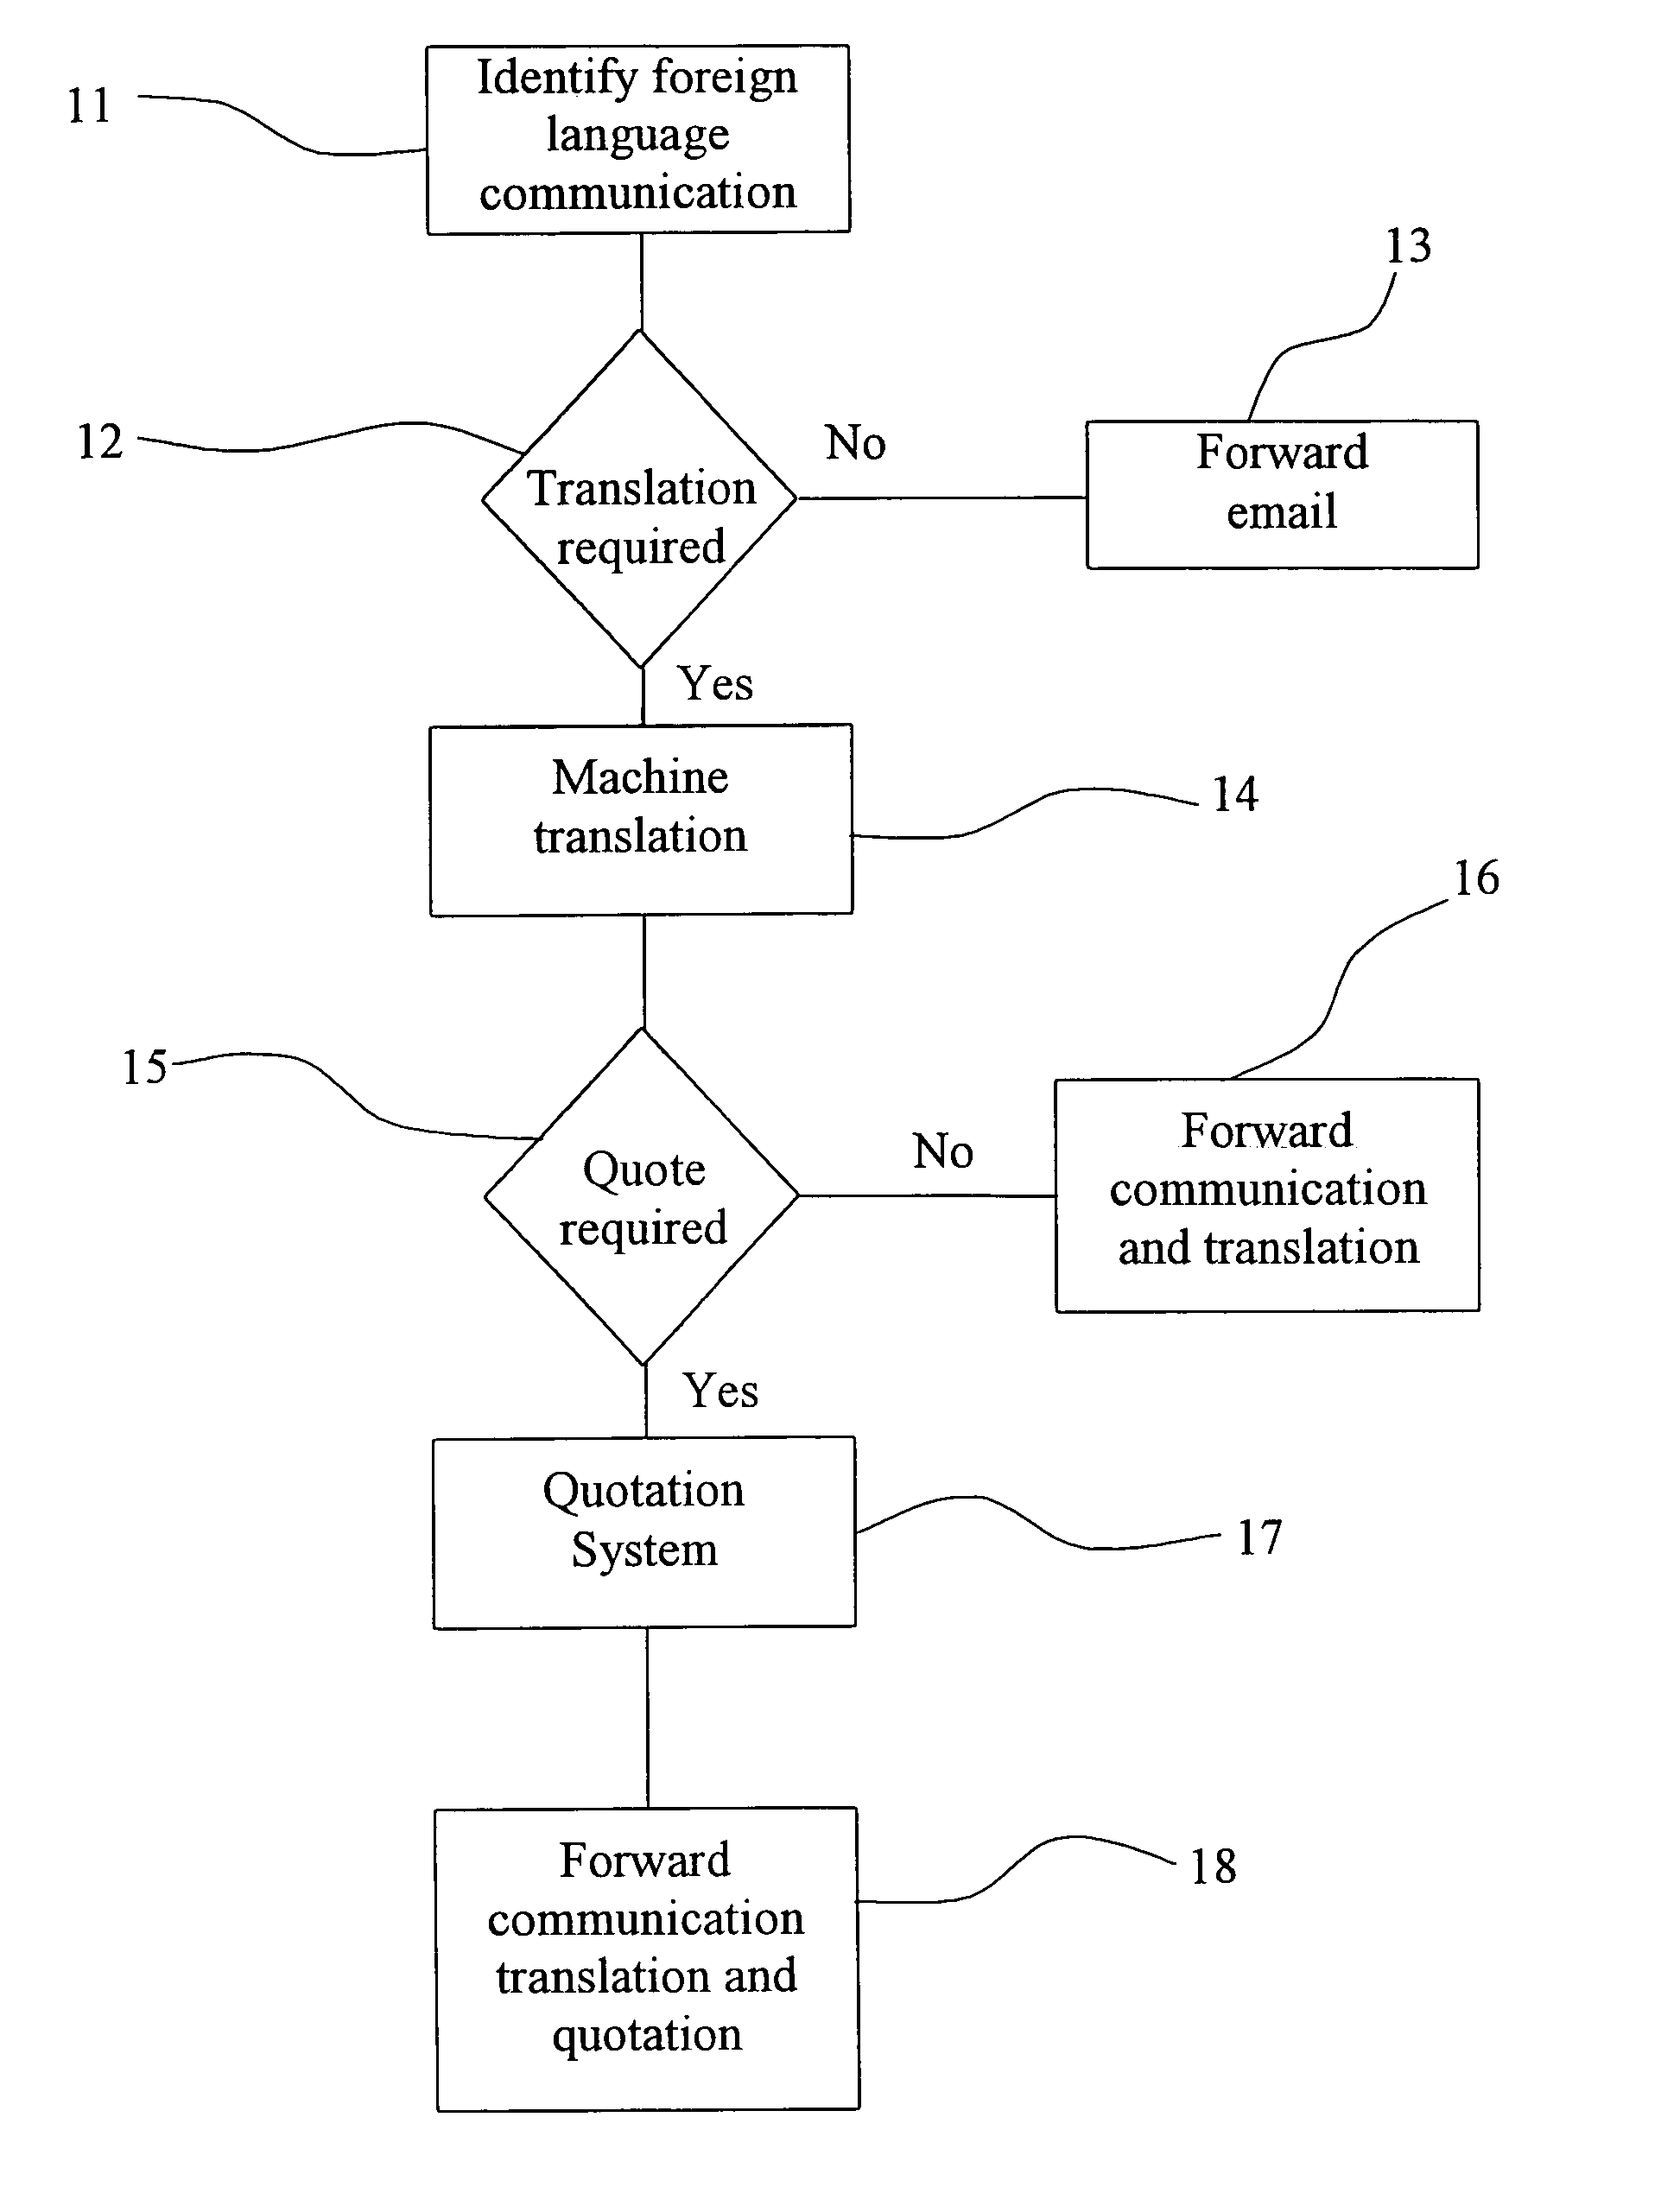 Communication processing system